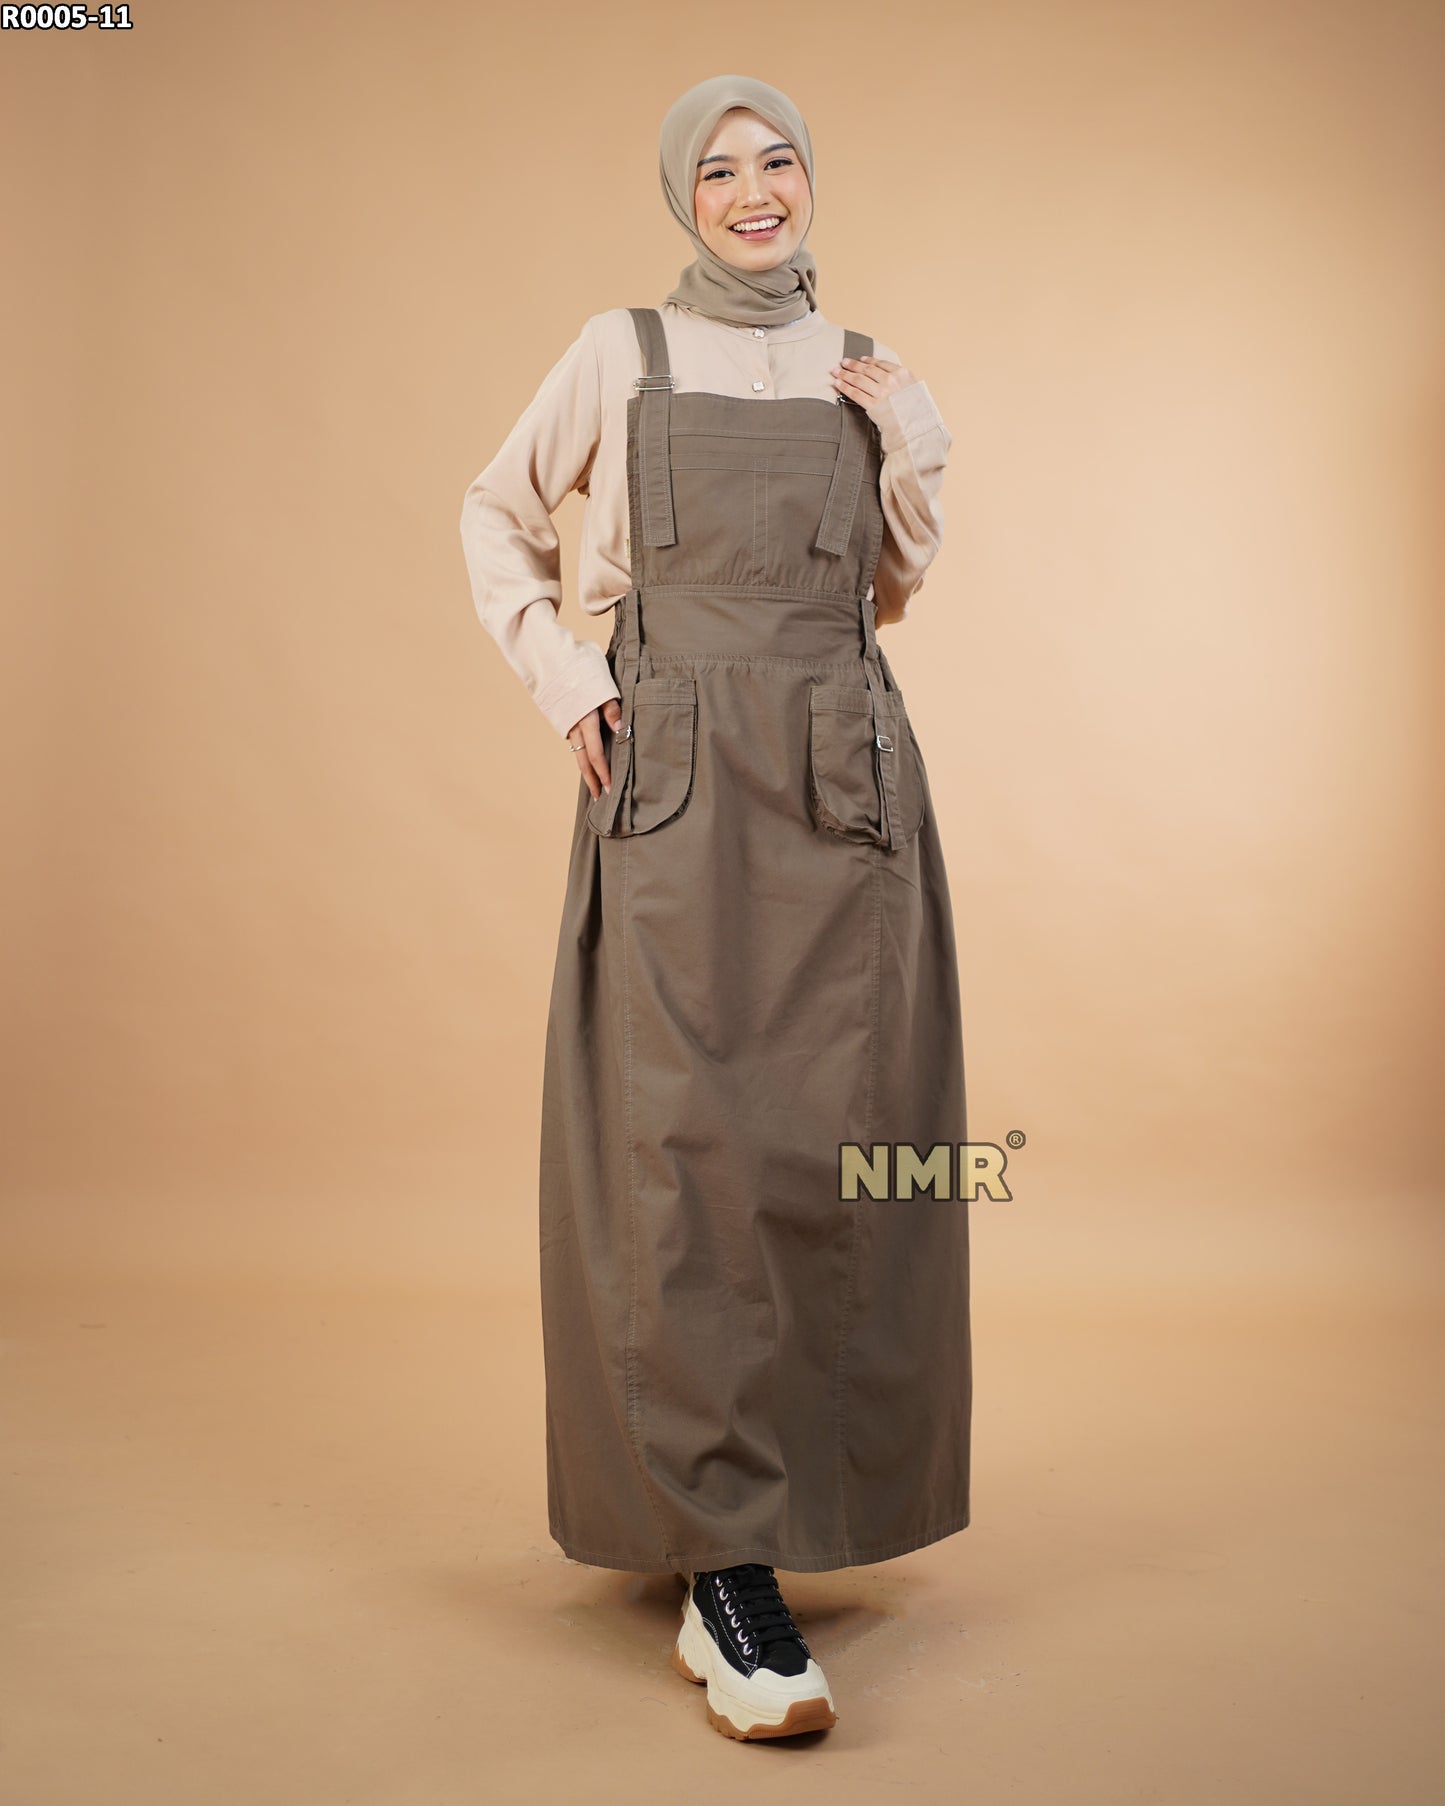 NMR Gamis Jumpsuit Overall Baby Canvas Vol R0005-11